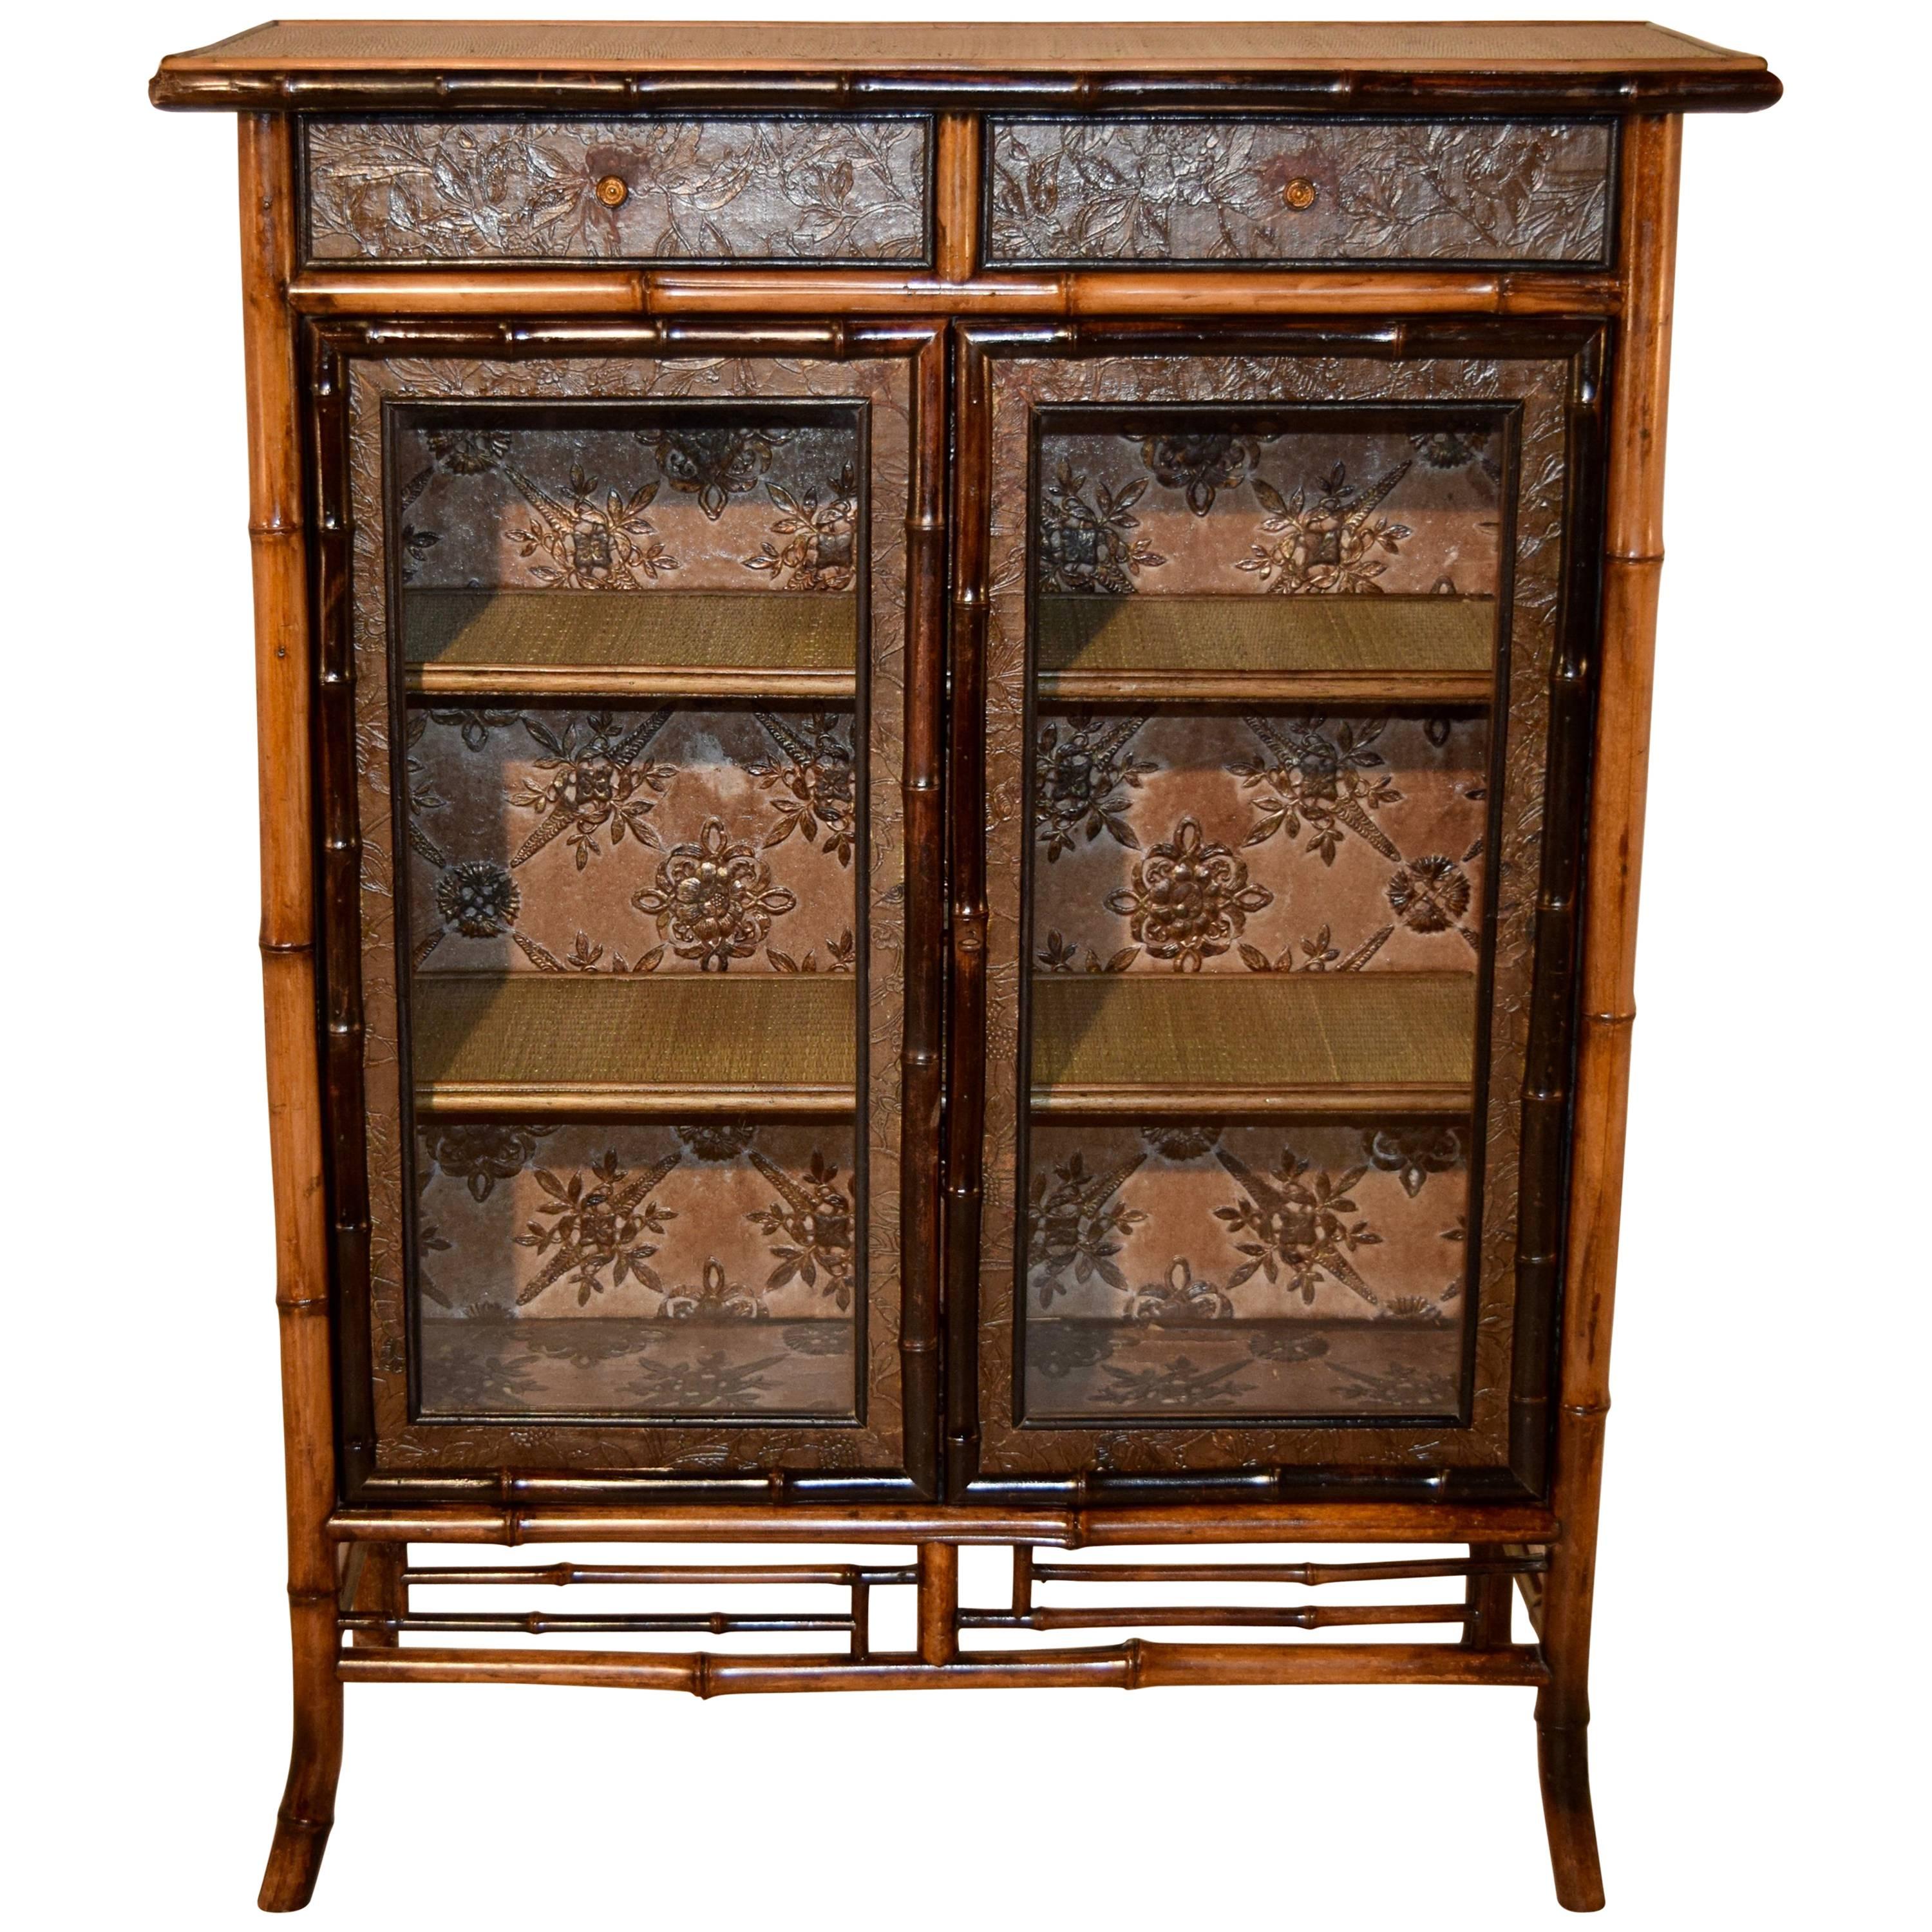 19th Century Bamboo Bookcase with Glazed Doors